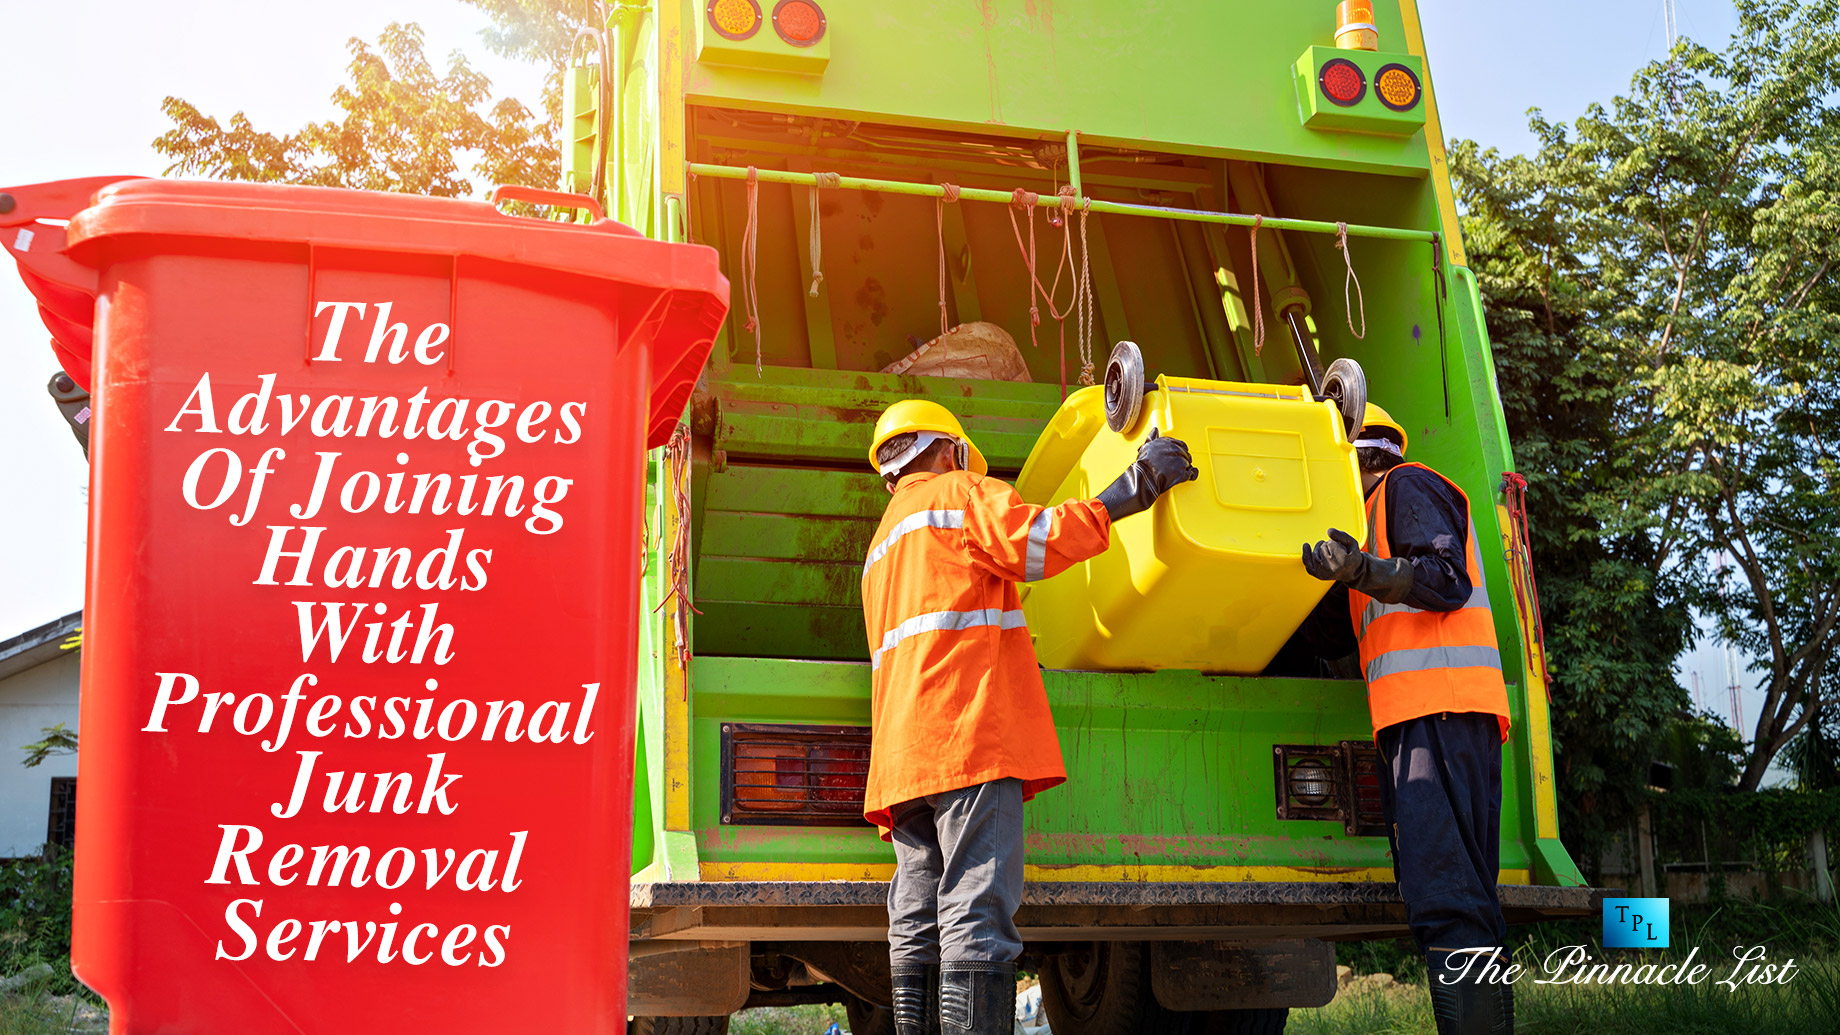 The Advantages Of Joining Hands With Professional Junk Removal Services